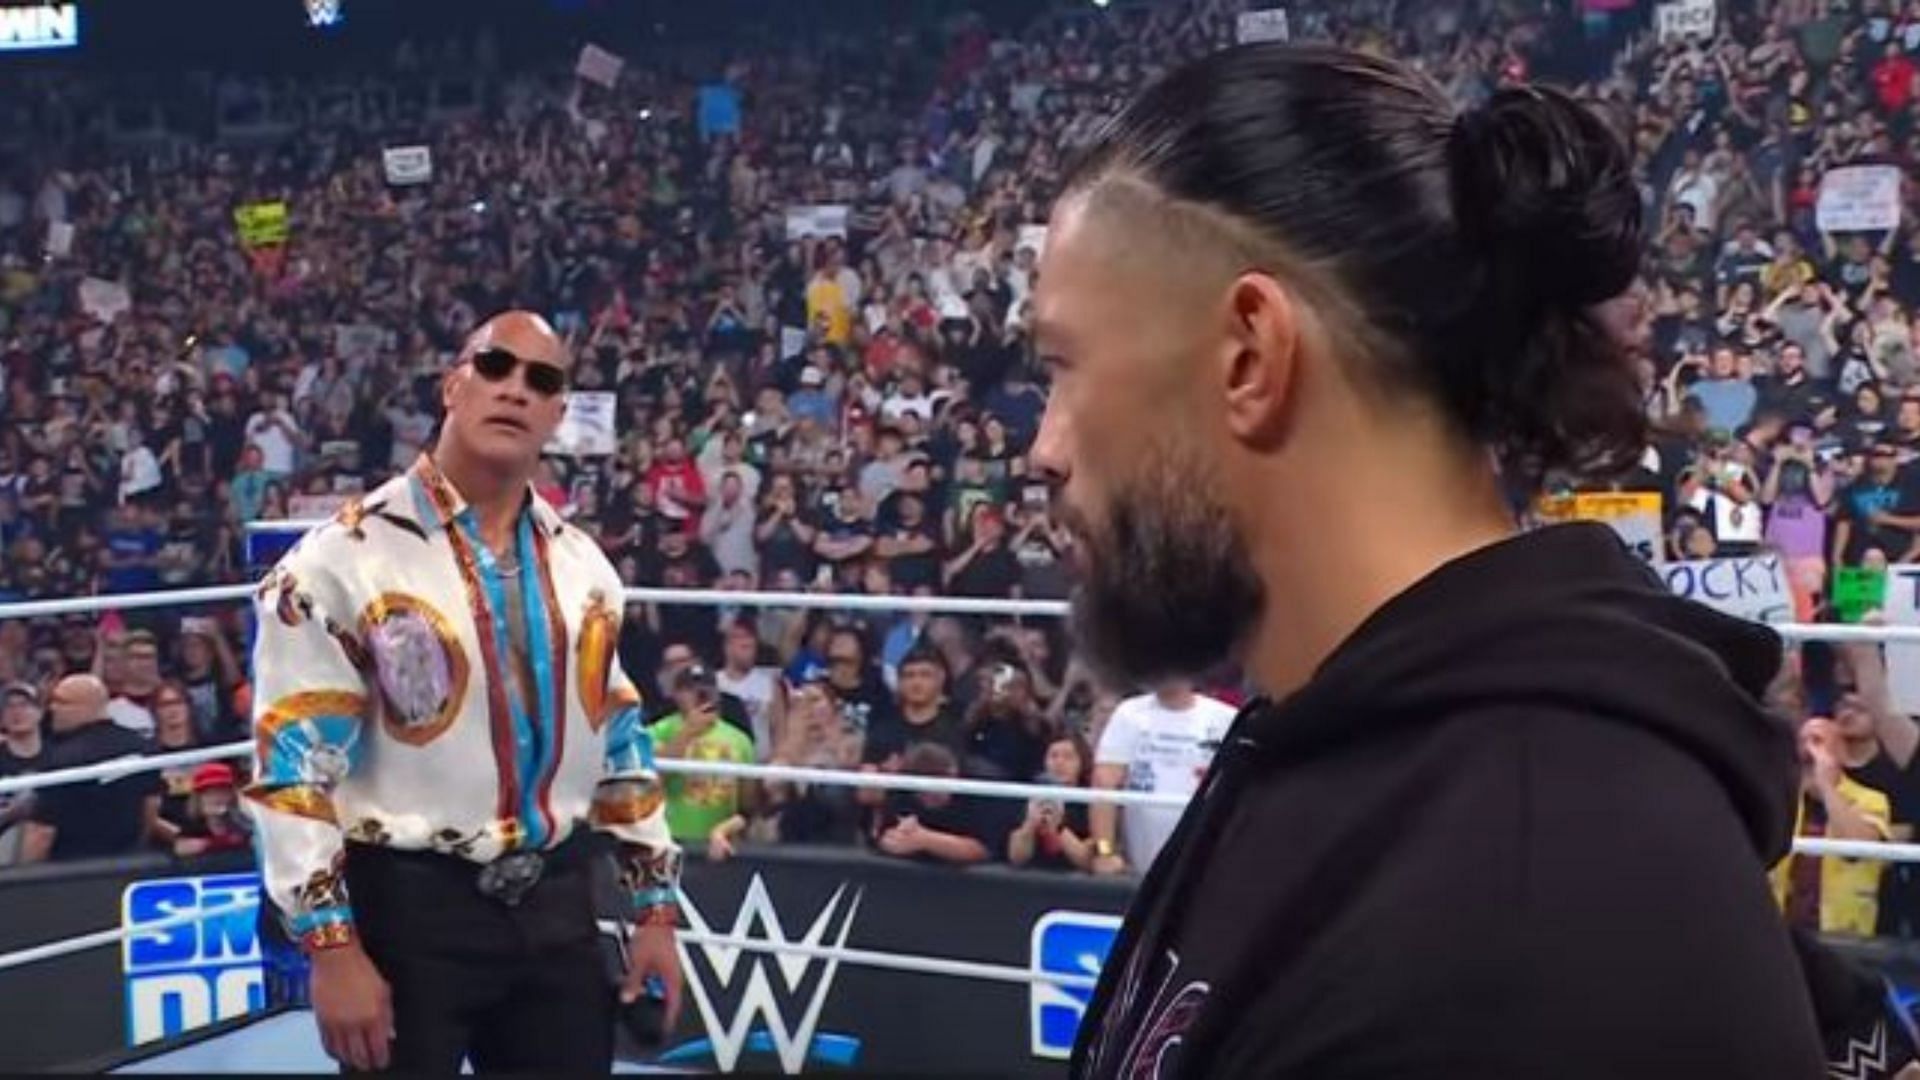 The Rock acknowledged Roman Reigns on WWE SmackDown